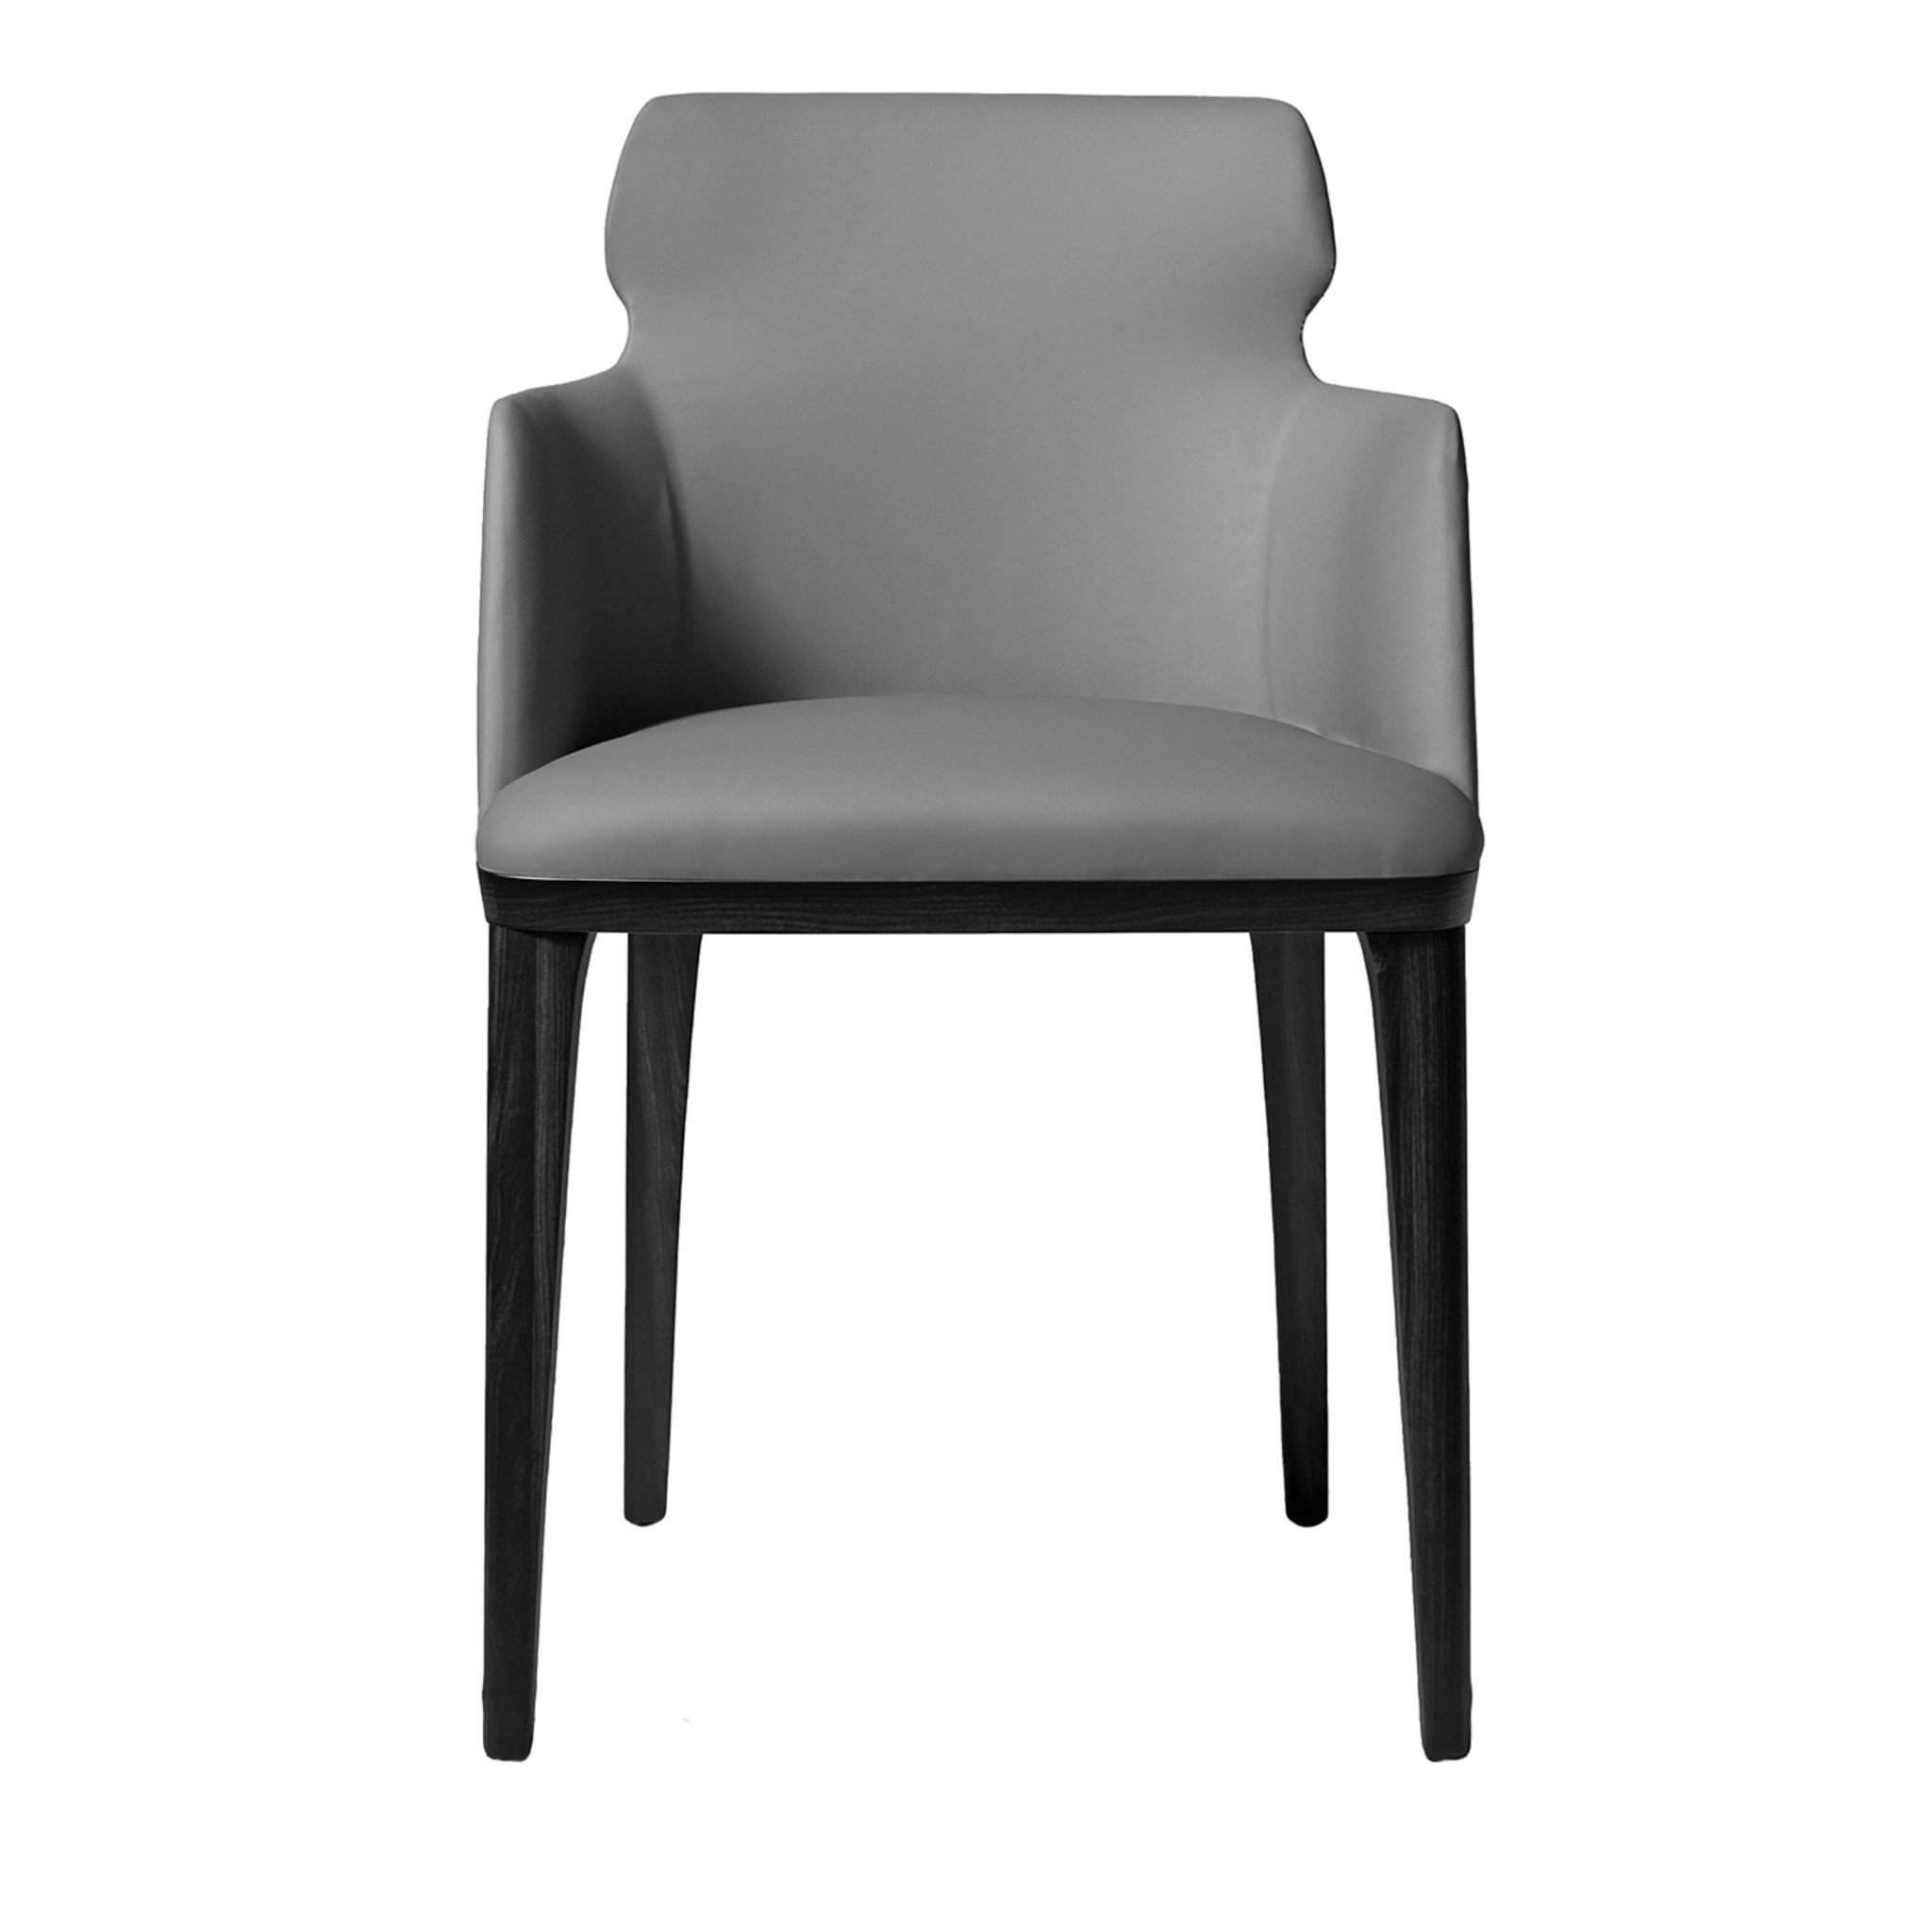 Shape Gray Leather Chair - Main view